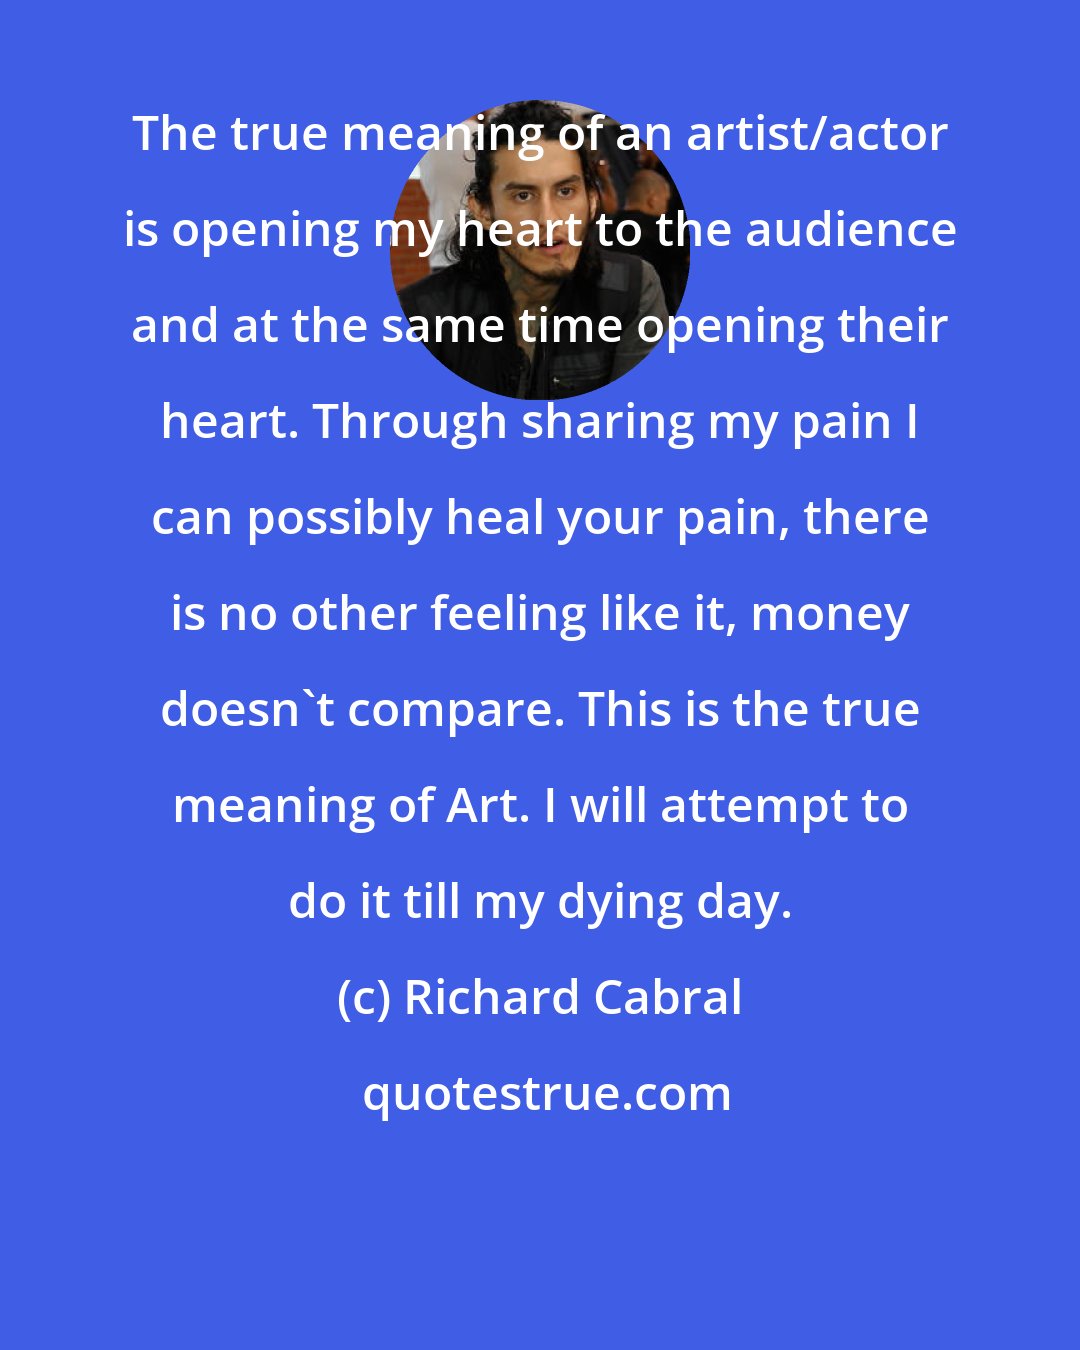 Richard Cabral: The true meaning of an artist/actor is opening my heart to the audience and at the same time opening their heart. Through sharing my pain I can possibly heal your pain, there is no other feeling like it, money doesn't compare. This is the true meaning of Art. I will attempt to do it till my dying day.